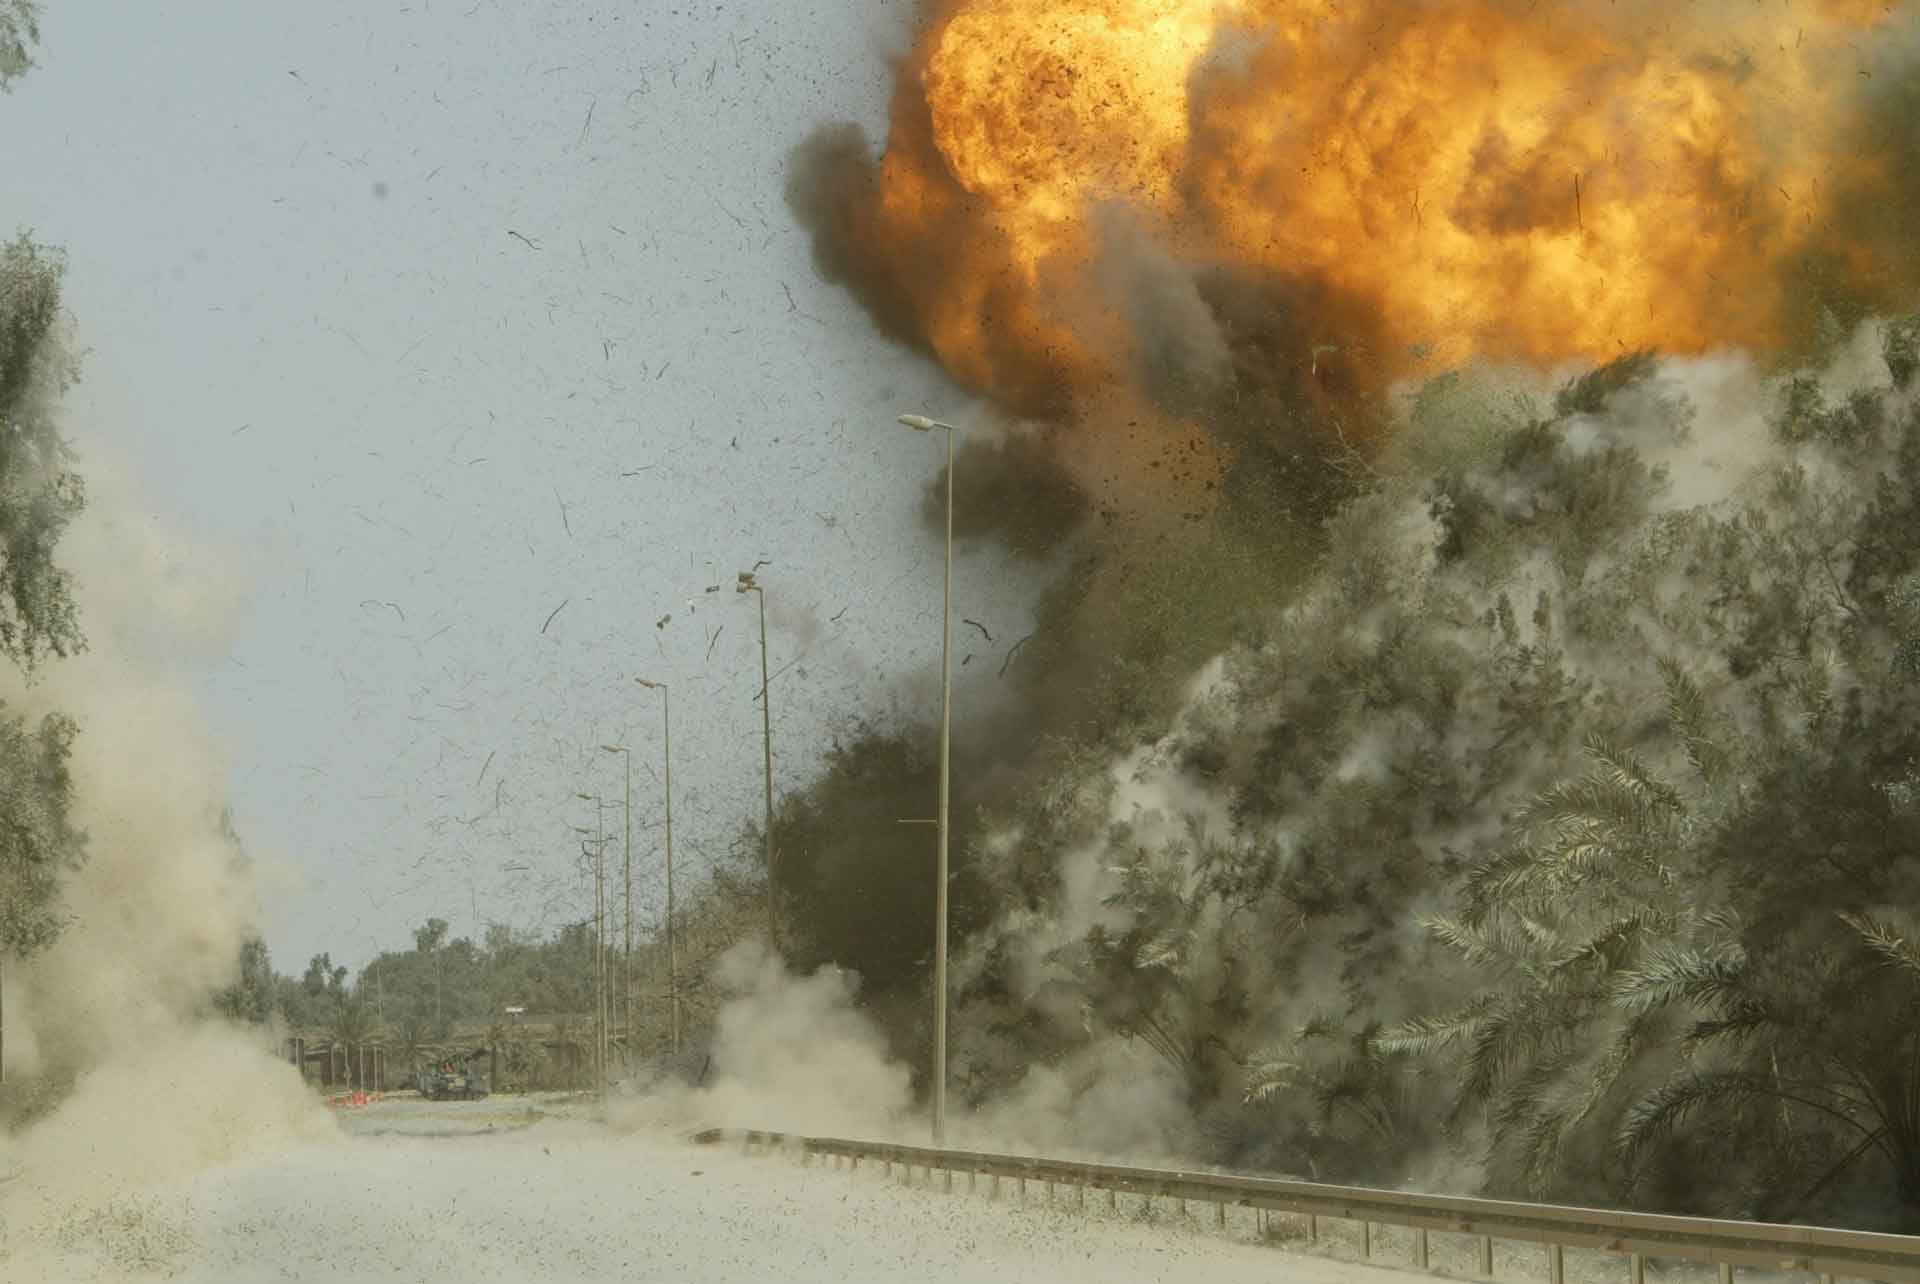 Controlled IED explosion in Iraq